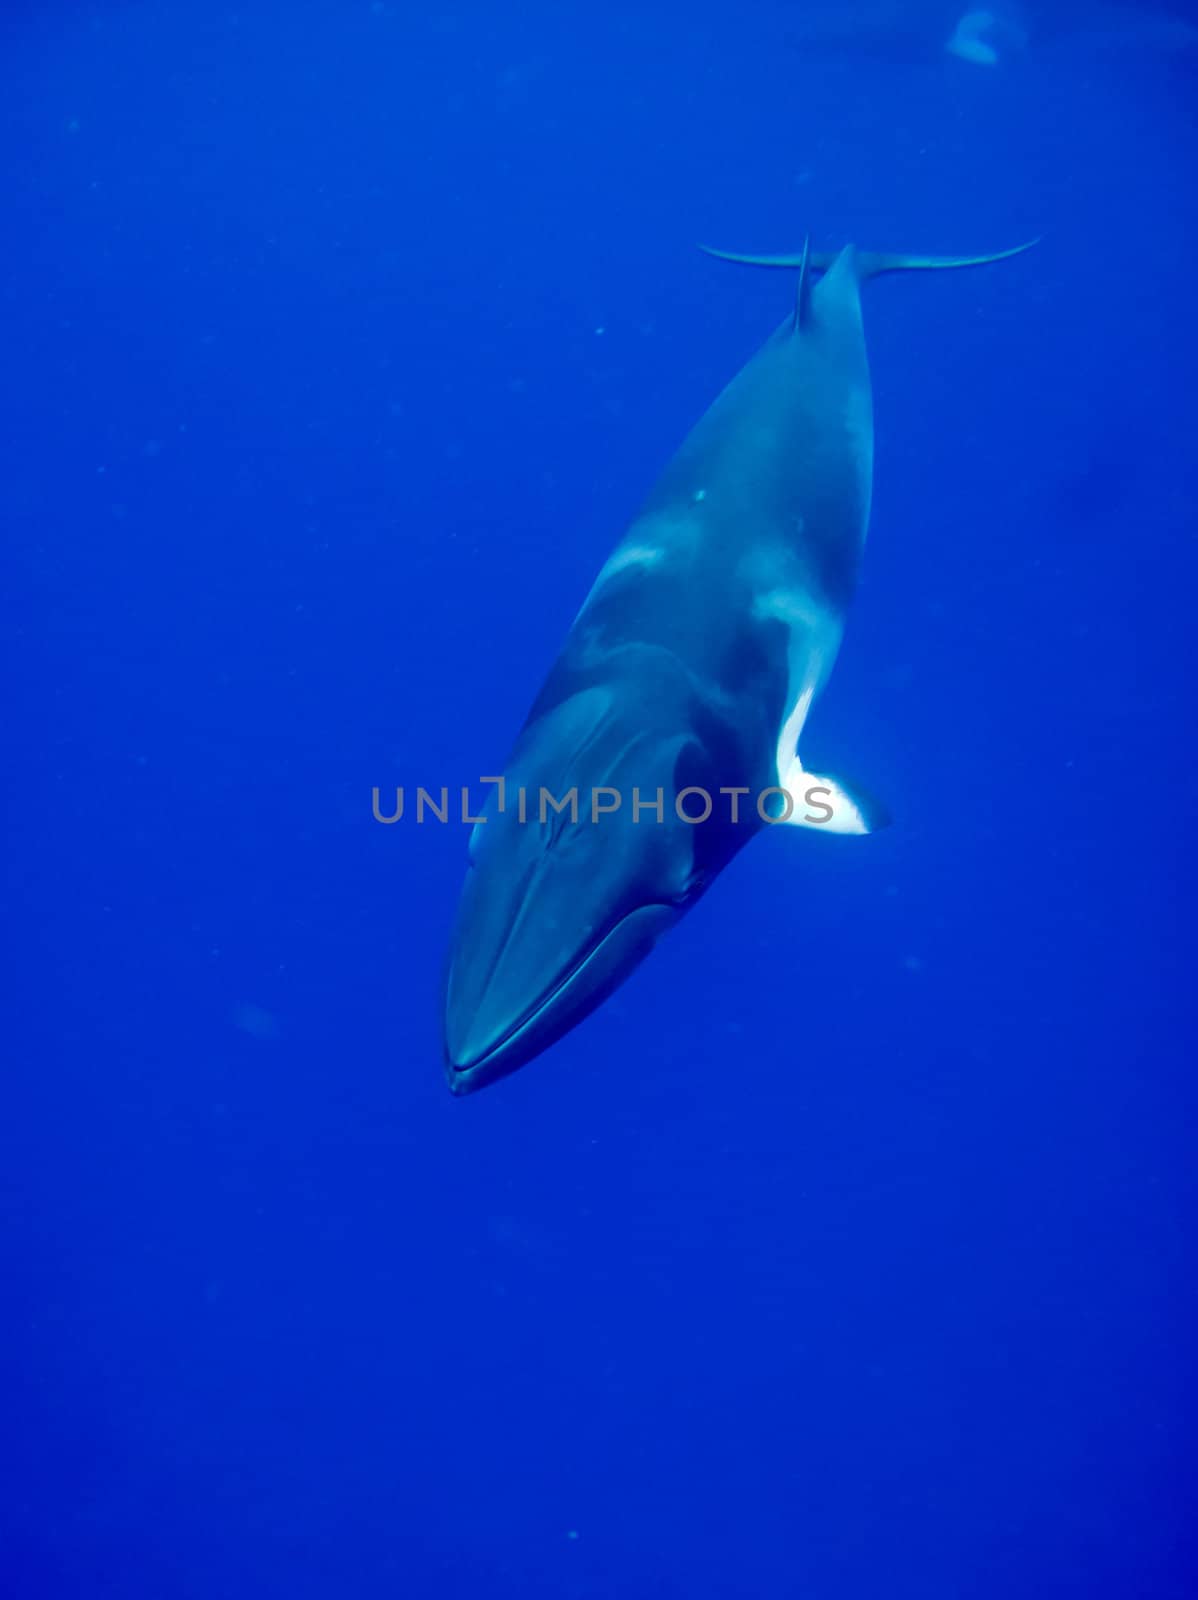 A huge Minke whale swims by in the Blue of the great barrier reef.